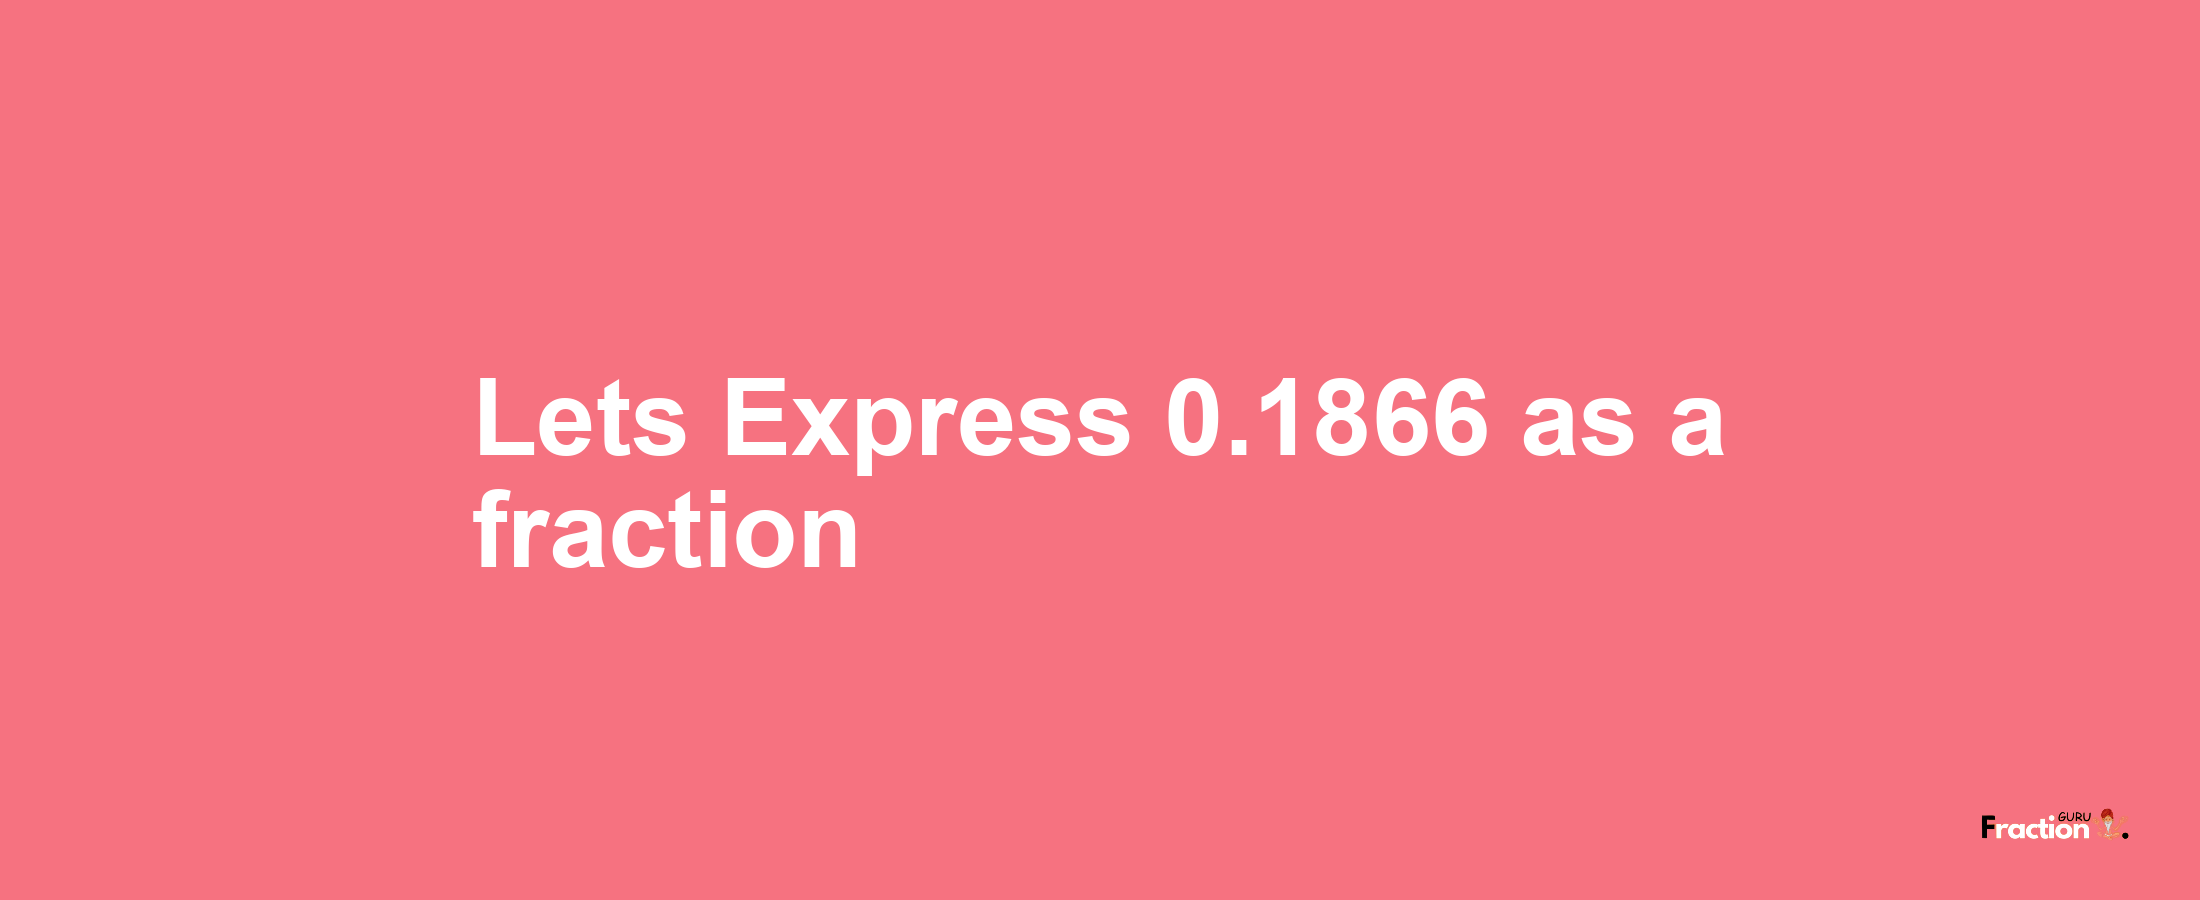 Lets Express 0.1866 as afraction